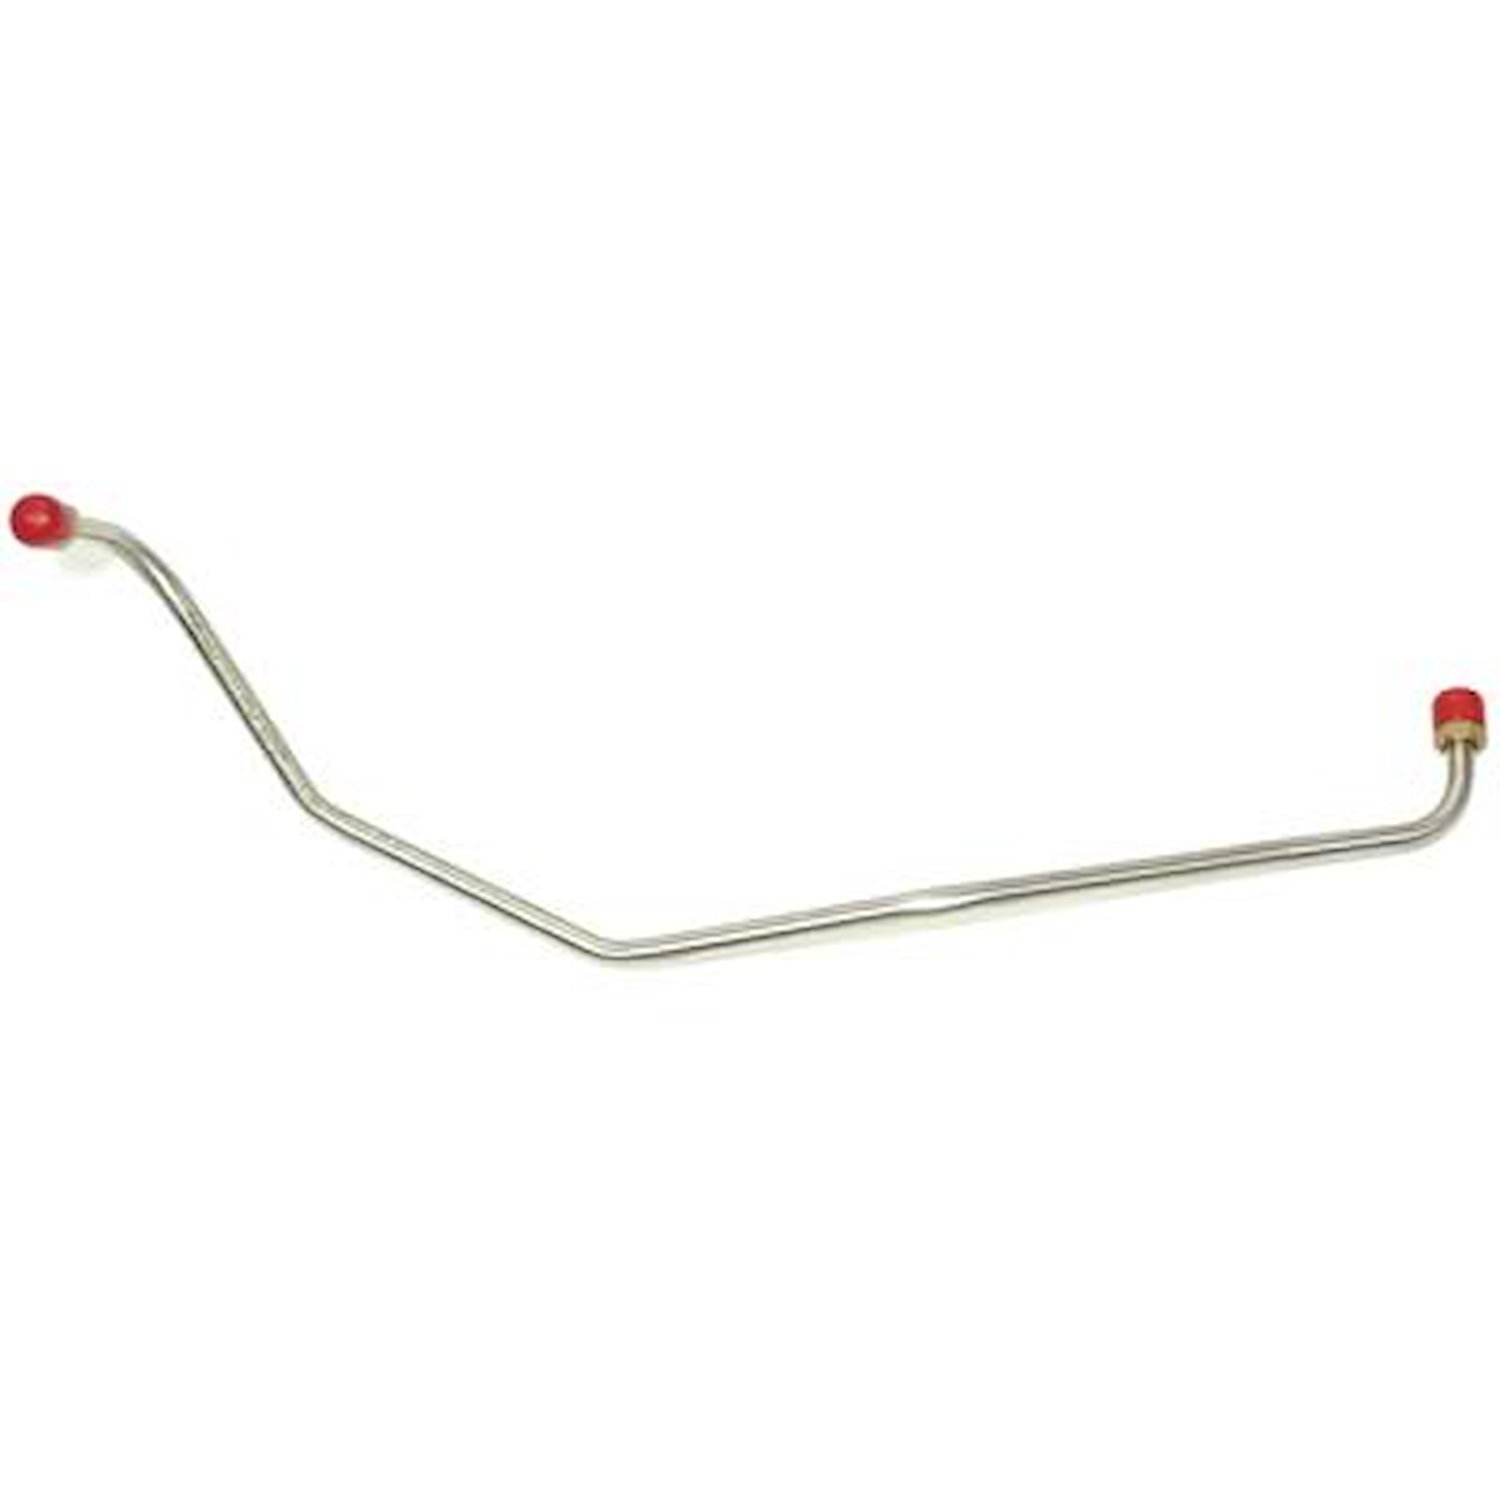 67 5/16IN. Main Fuel Line - Front to Rear Fuel Line - Stainless